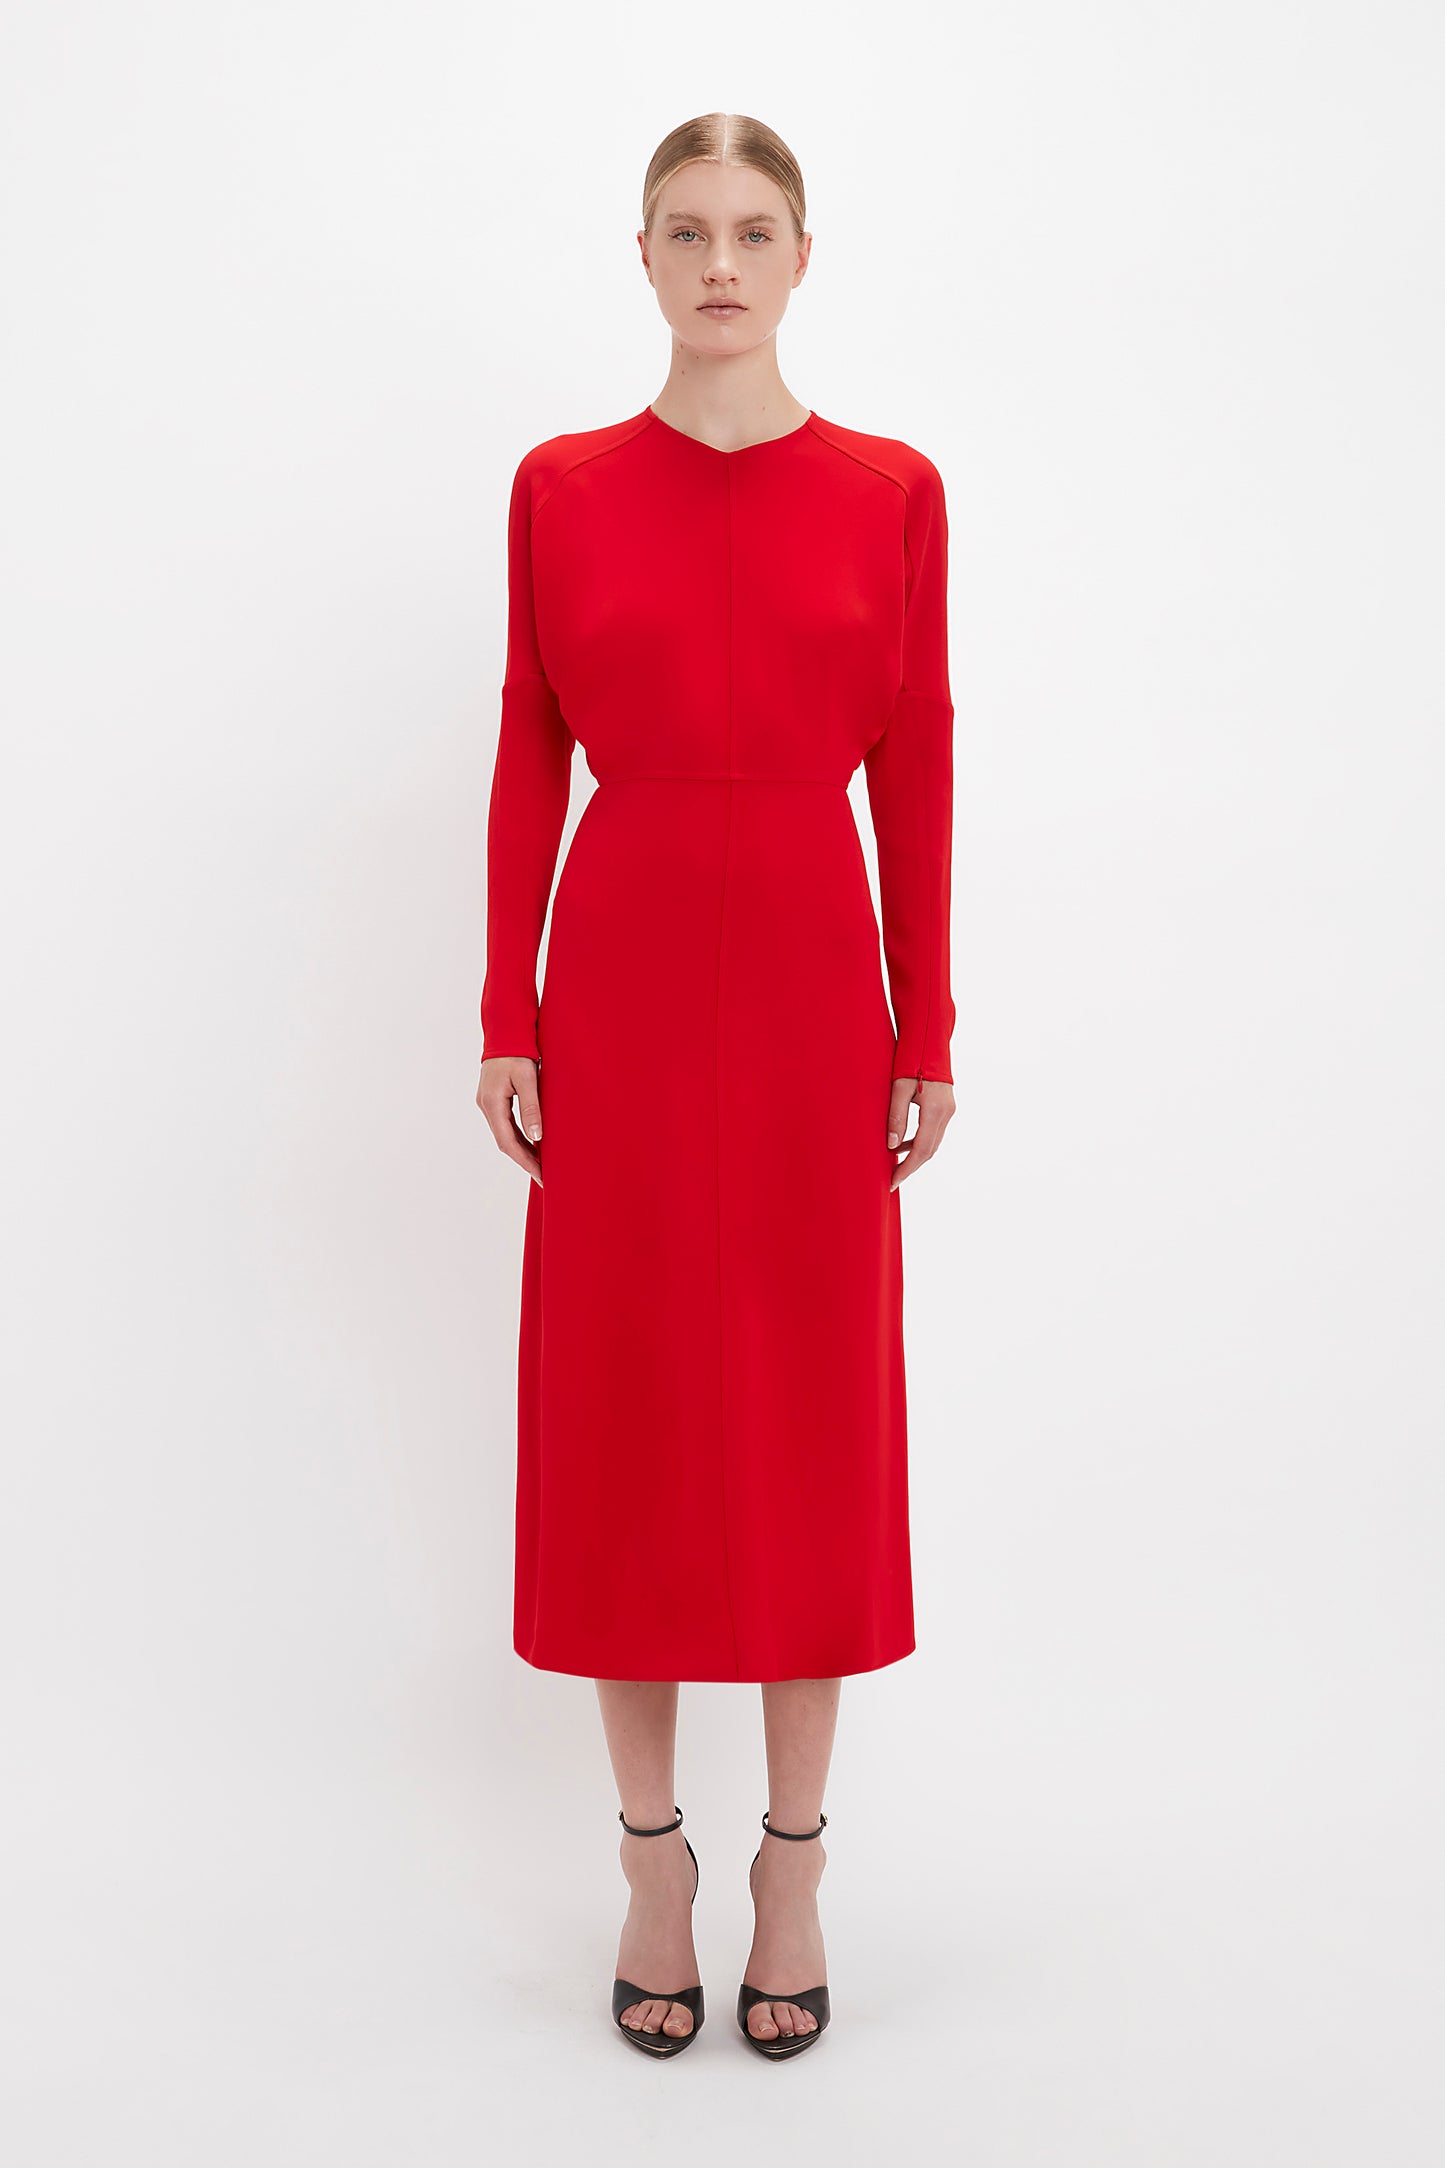 A woman in a simple Victoria Beckham Dolman Midi Red dress and black pointy toe stilettos standing against a white background.